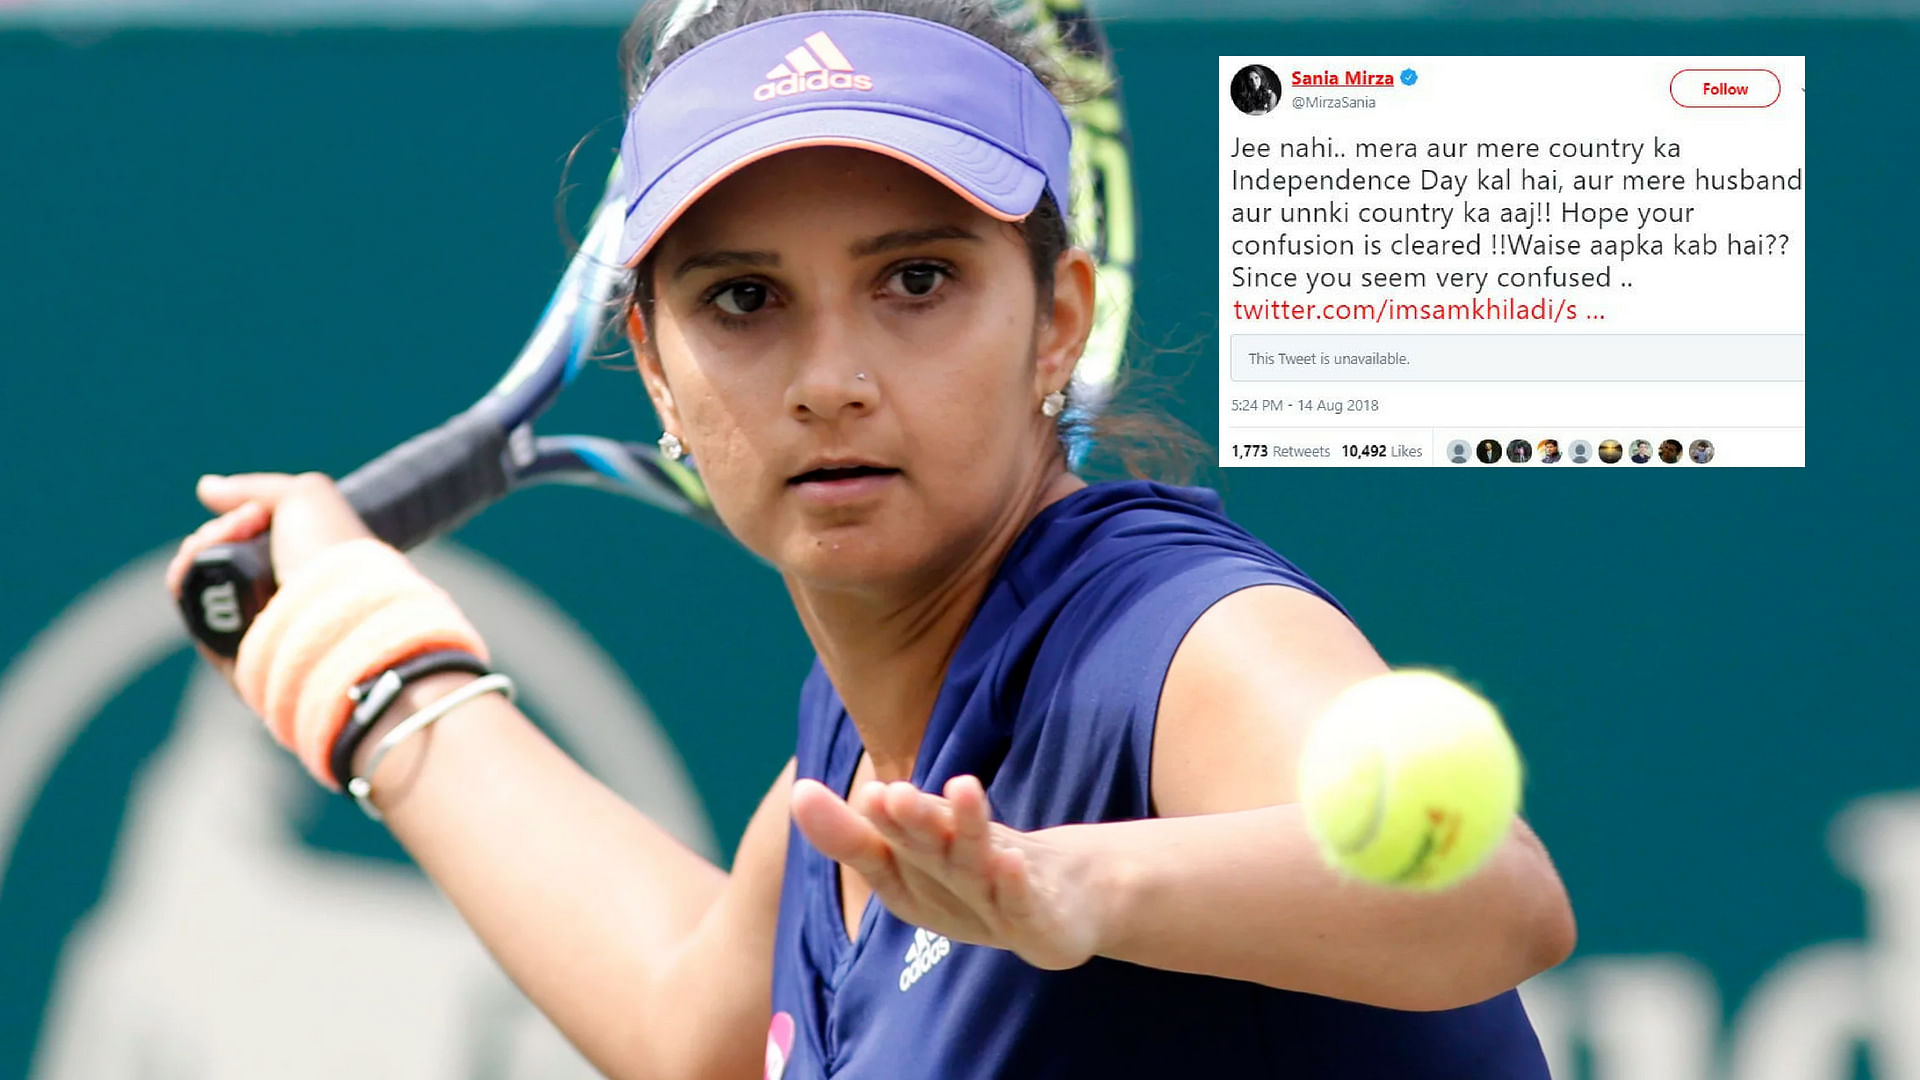 Eight years after Indian tennis star Sania Mirza’s marriage to Pakistani cricketer Shoaib Malik, the trolls haven’t eased up. &nbsp;